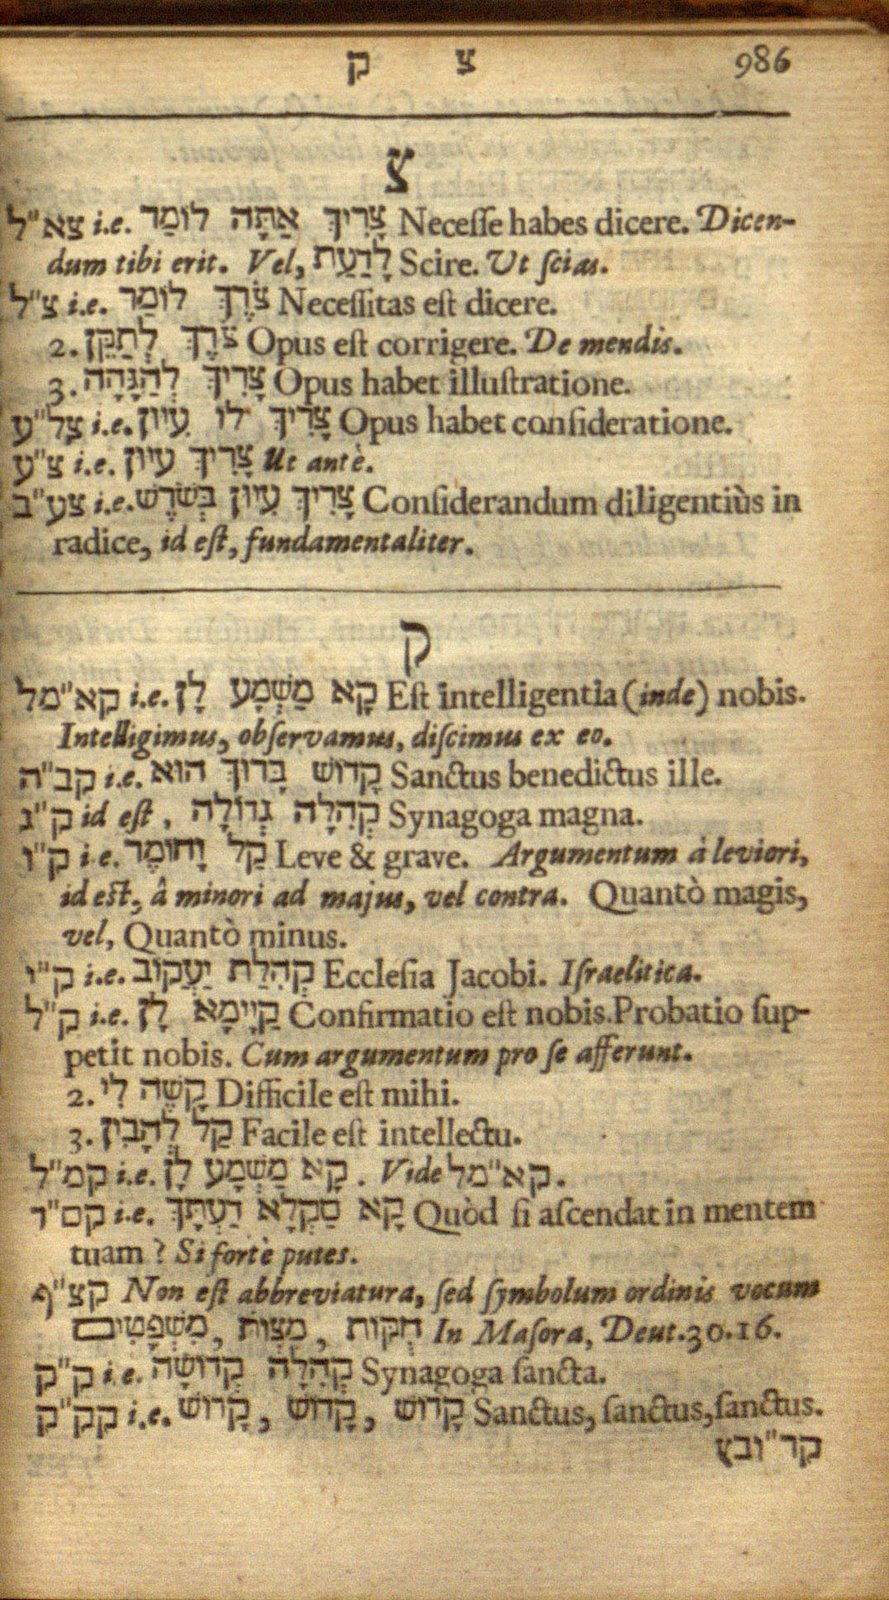 Excerpt from Synagoga Judaica, page 986